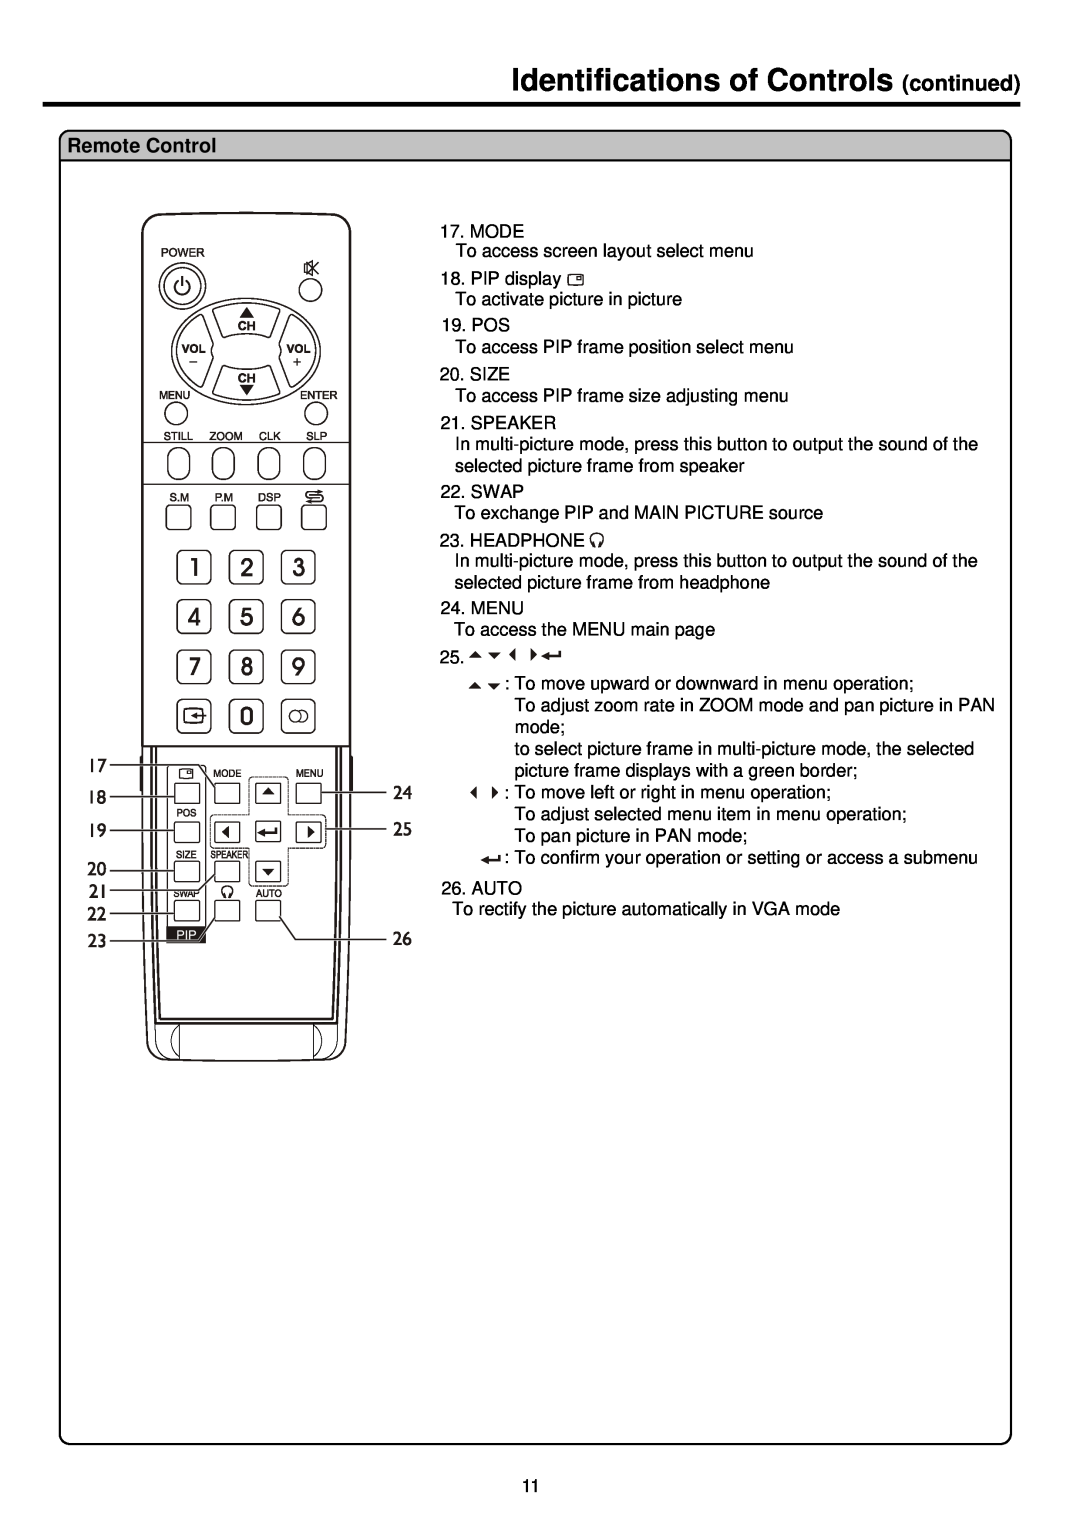 Palsonic PDP4200 owner manual Identifications of Controls continued, Remote Control 